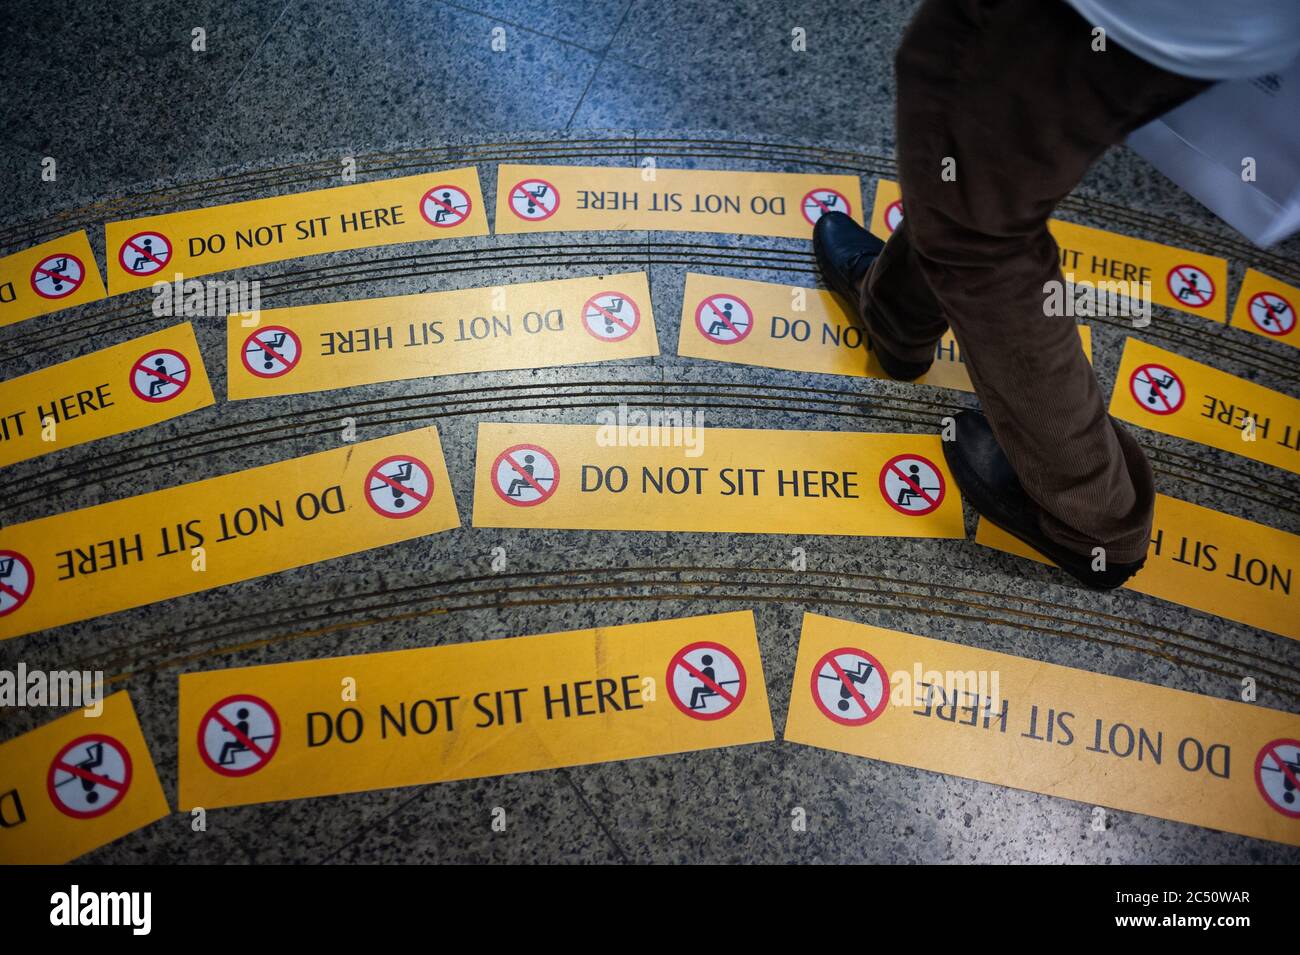 19.06.2020, Singapore, Republic of Singapore, Asia - Yellow prohibition signs are seen on steps at a MRT station that read Do Not Sit Here. Stock Photo